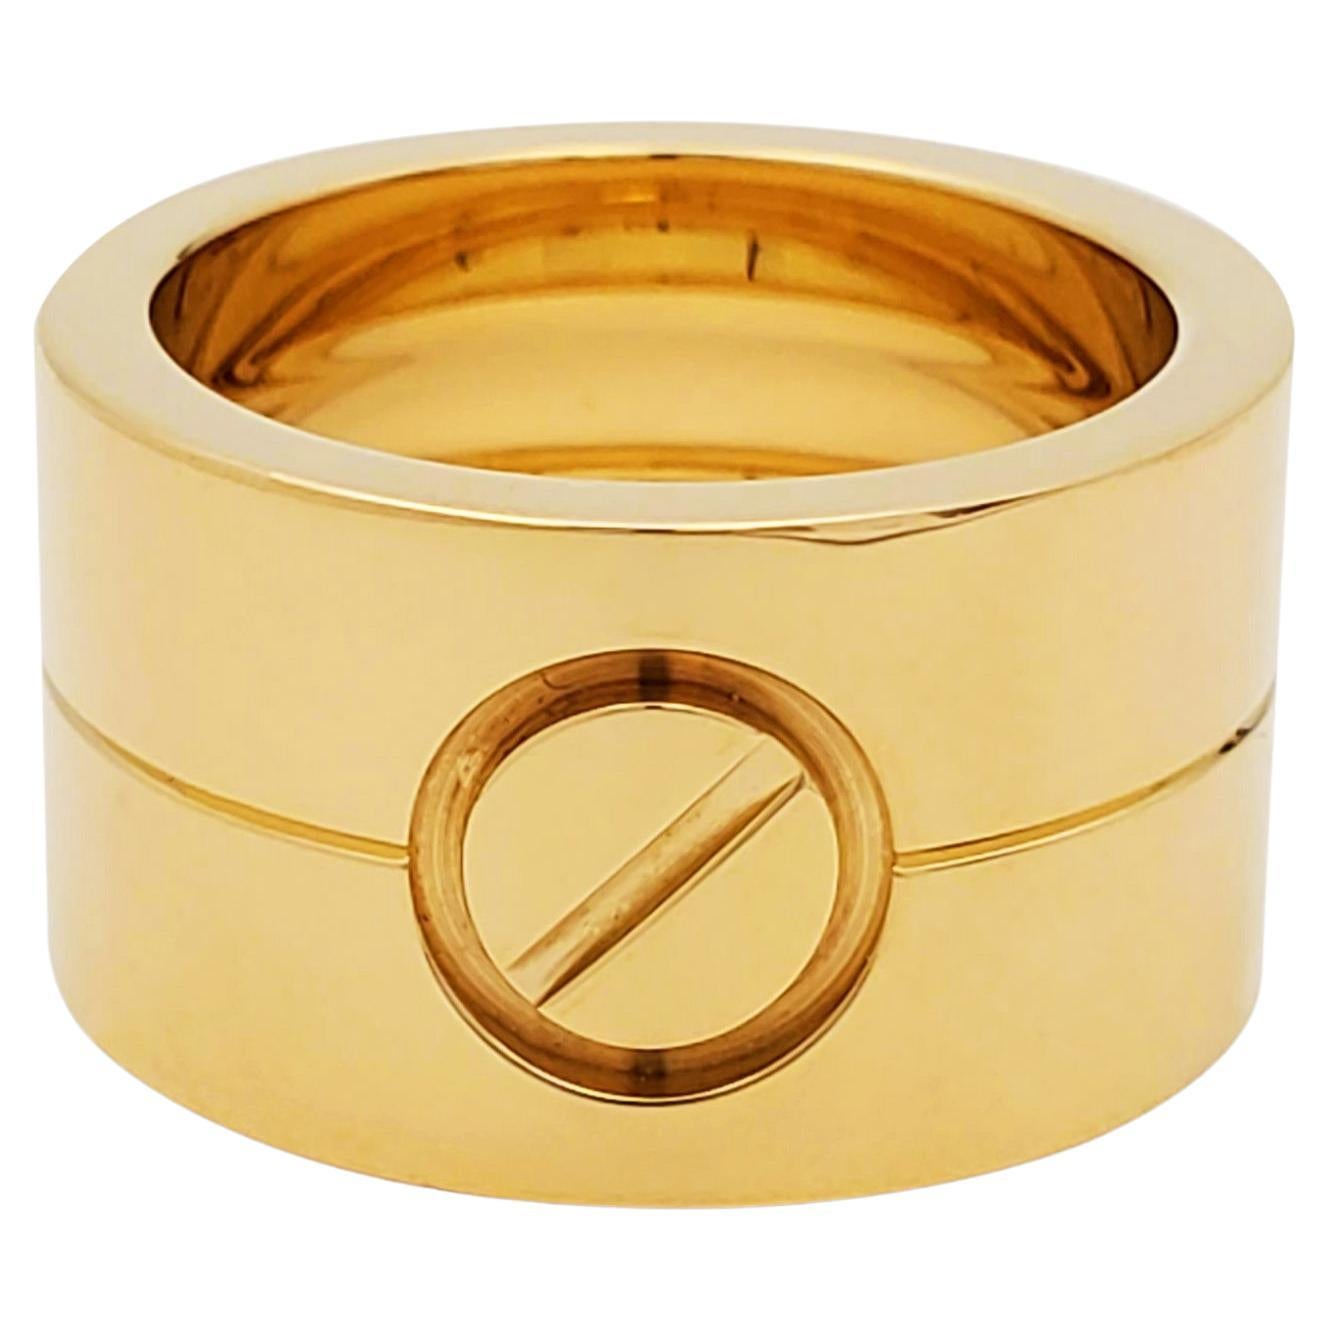 Cartier Love Yellow Gold Wide Band Ring